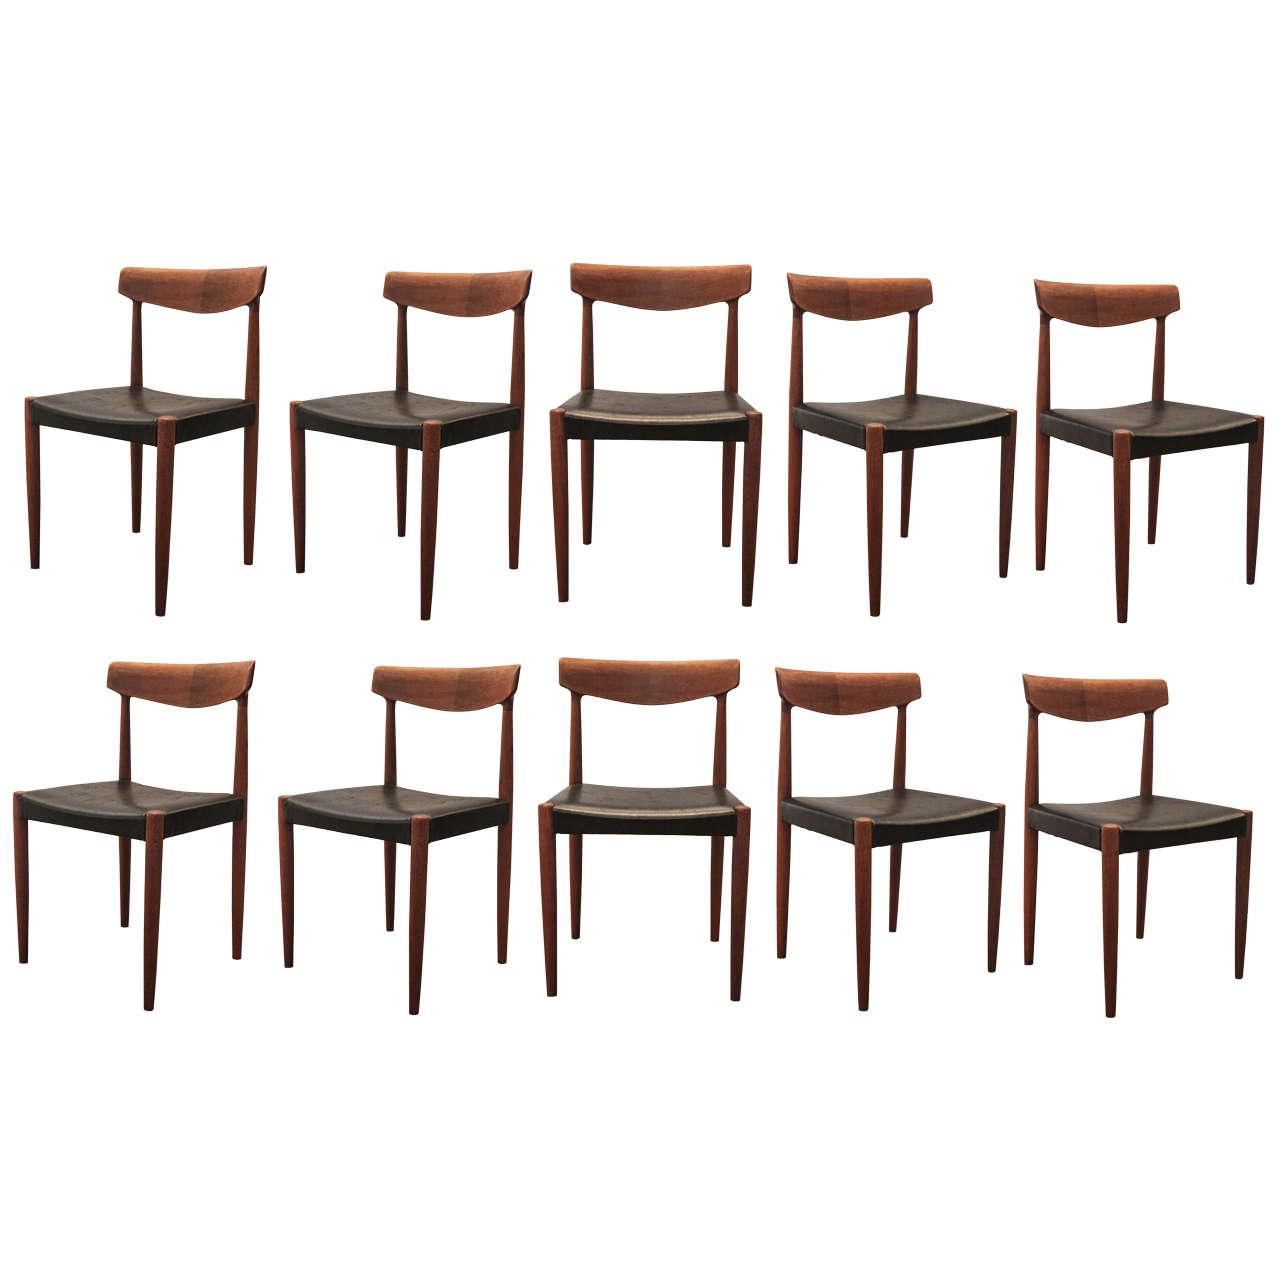 Set of Ten Dining Chairs by Knud Faerch, Denmark, 1960